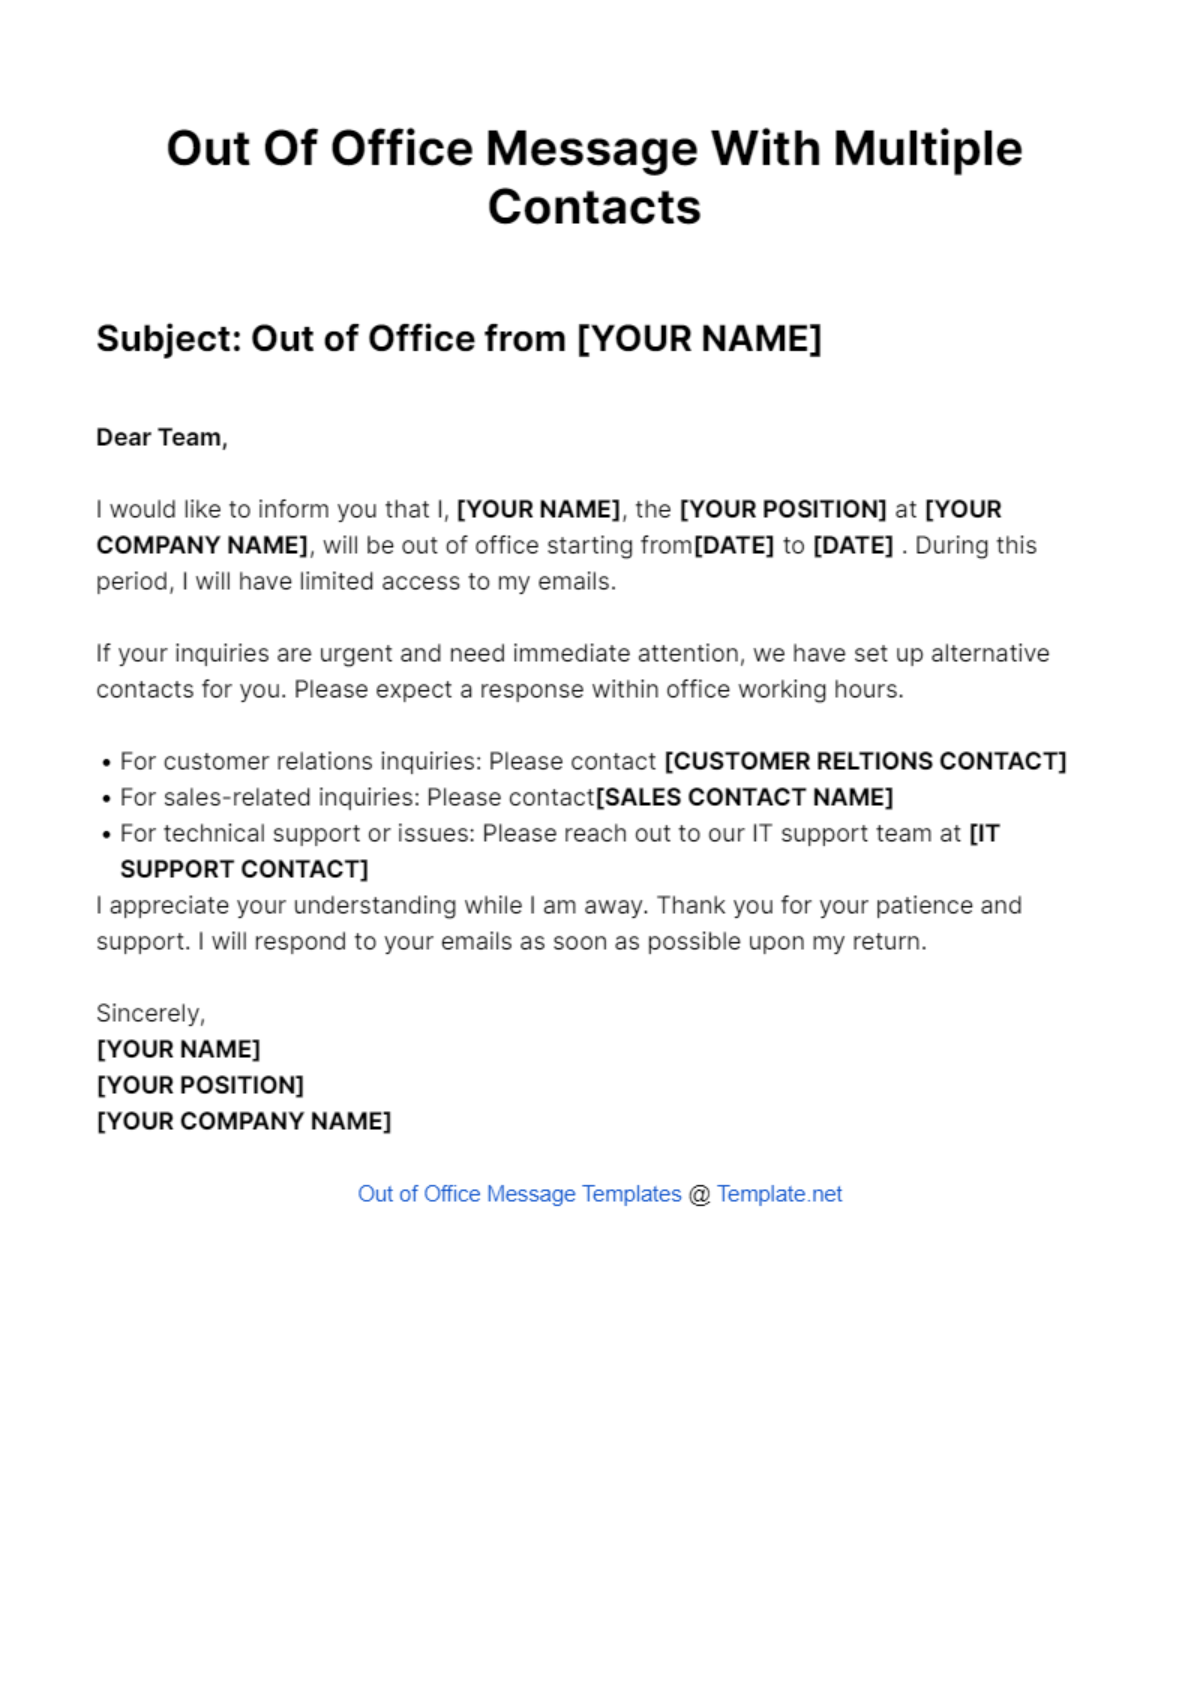 Out Of Office Message With Multiple Contacts Template